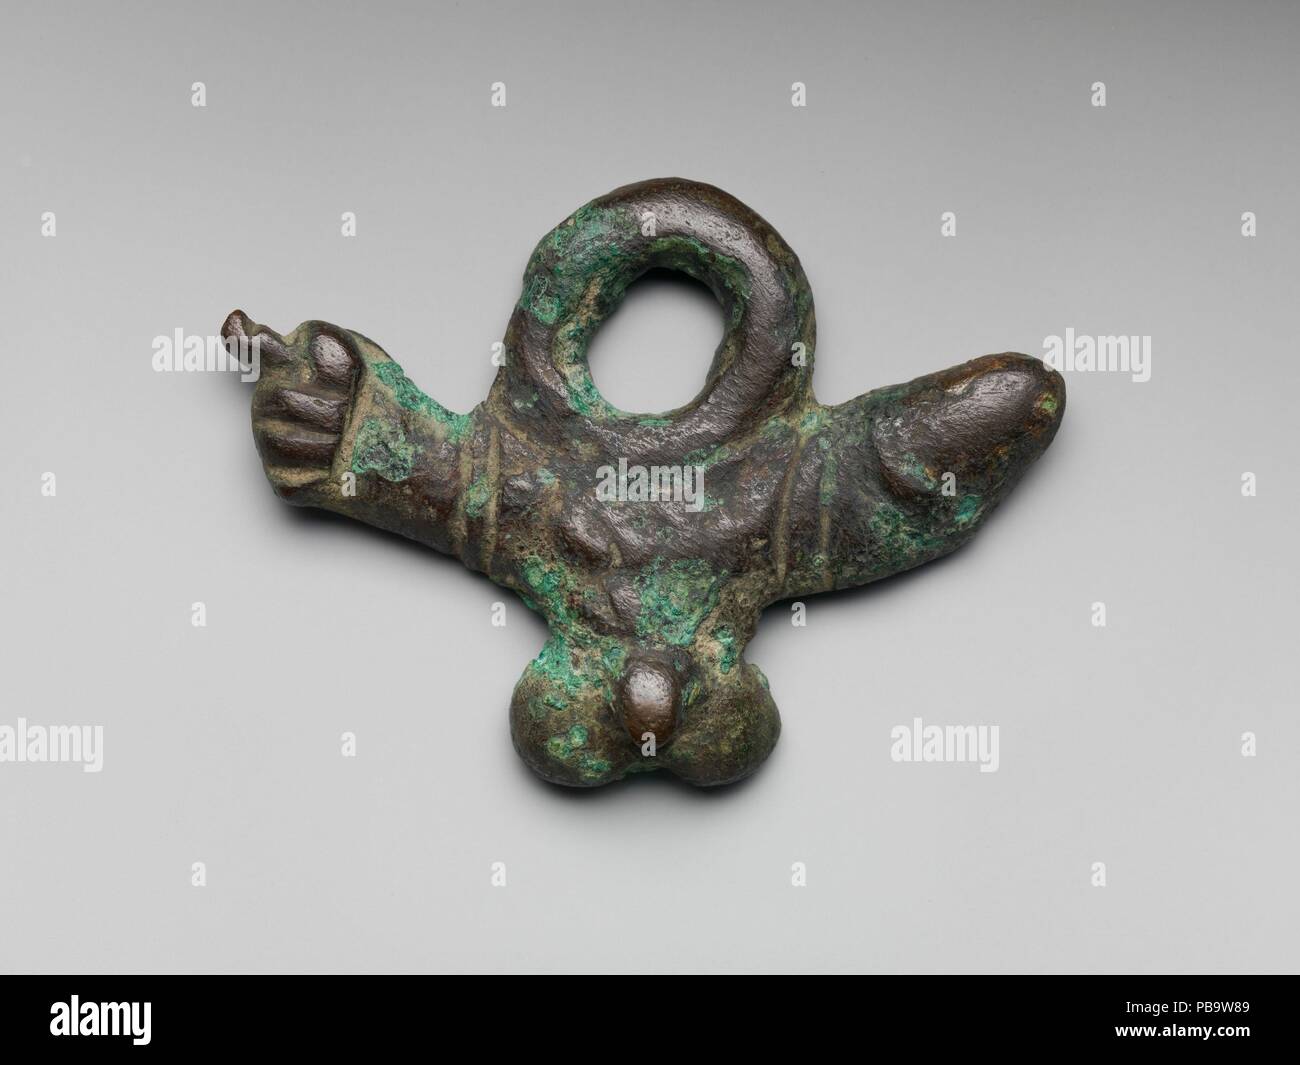 Bronze phallic amulet. Culture: Roman. Dimensions: W. 2 7/8 in. (7.3 cm.). Date: 1st century A.D..  This amulet incorporates three different symbols: the phallus, male genitalia, and the mano fica (a rude hand gesture). All three were potent apotropaic devices intended to ward off the Evil Eye. Museum: Metropolitan Museum of Art, New York, USA. Stock Photo